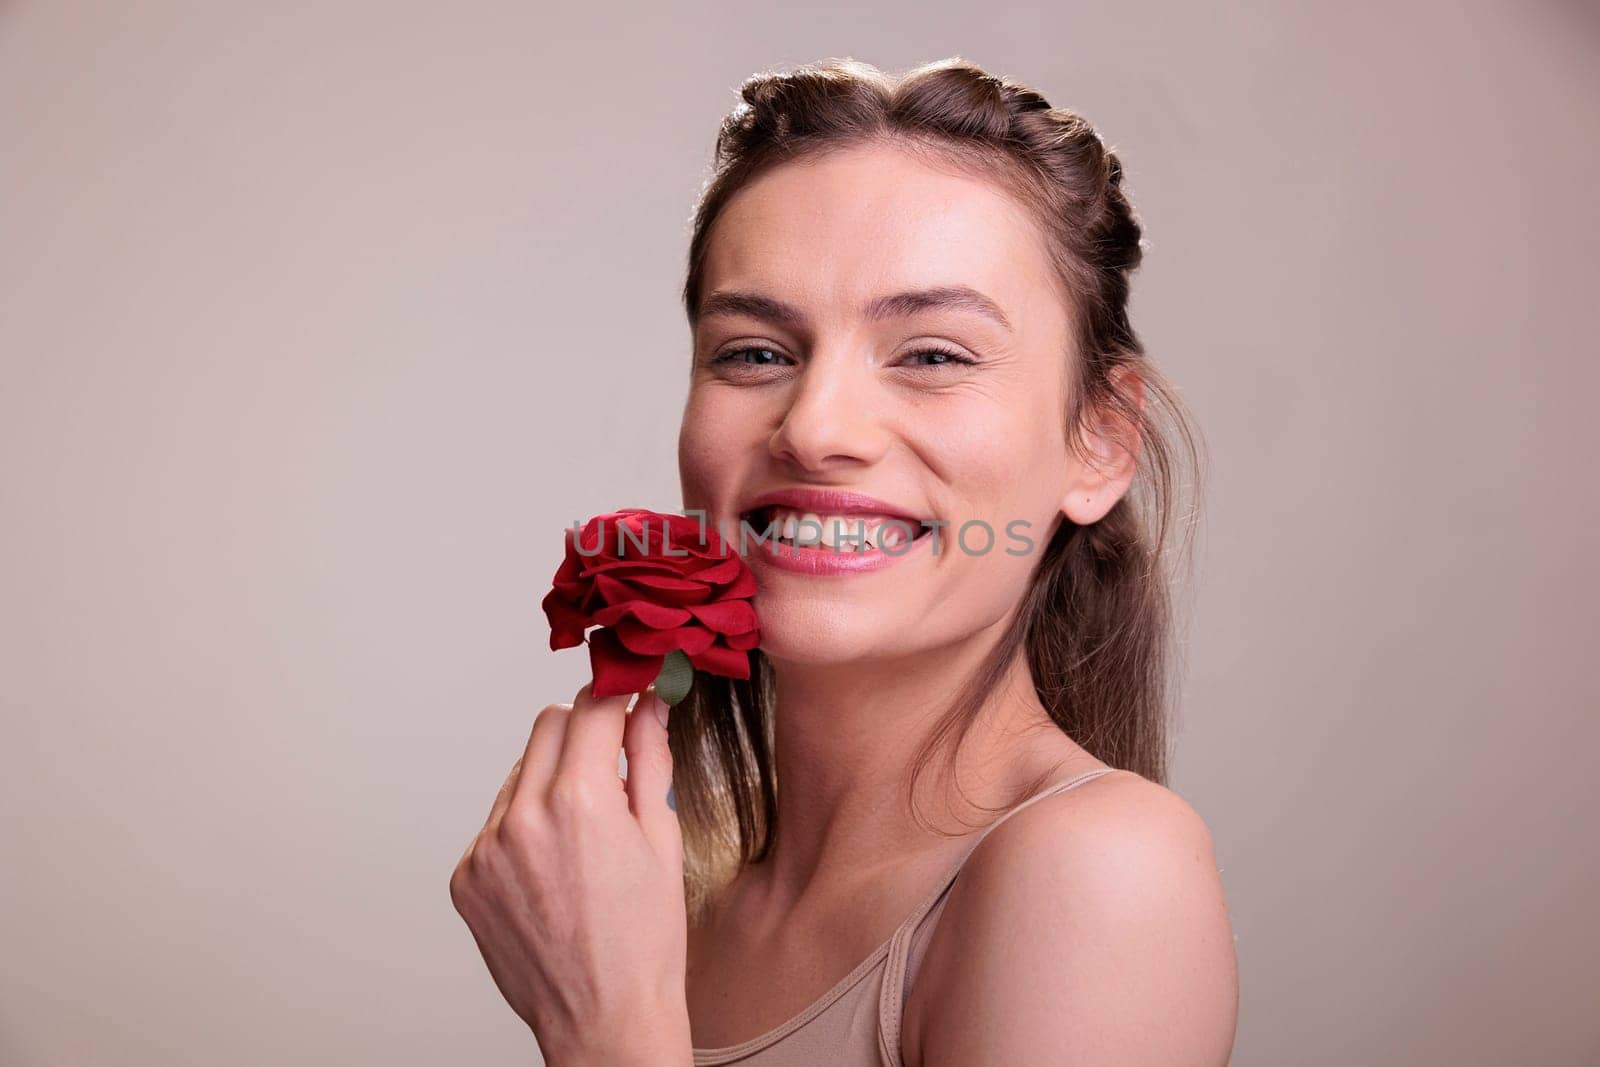 Laughing young woman posing with red rose gift portrait by DCStudio